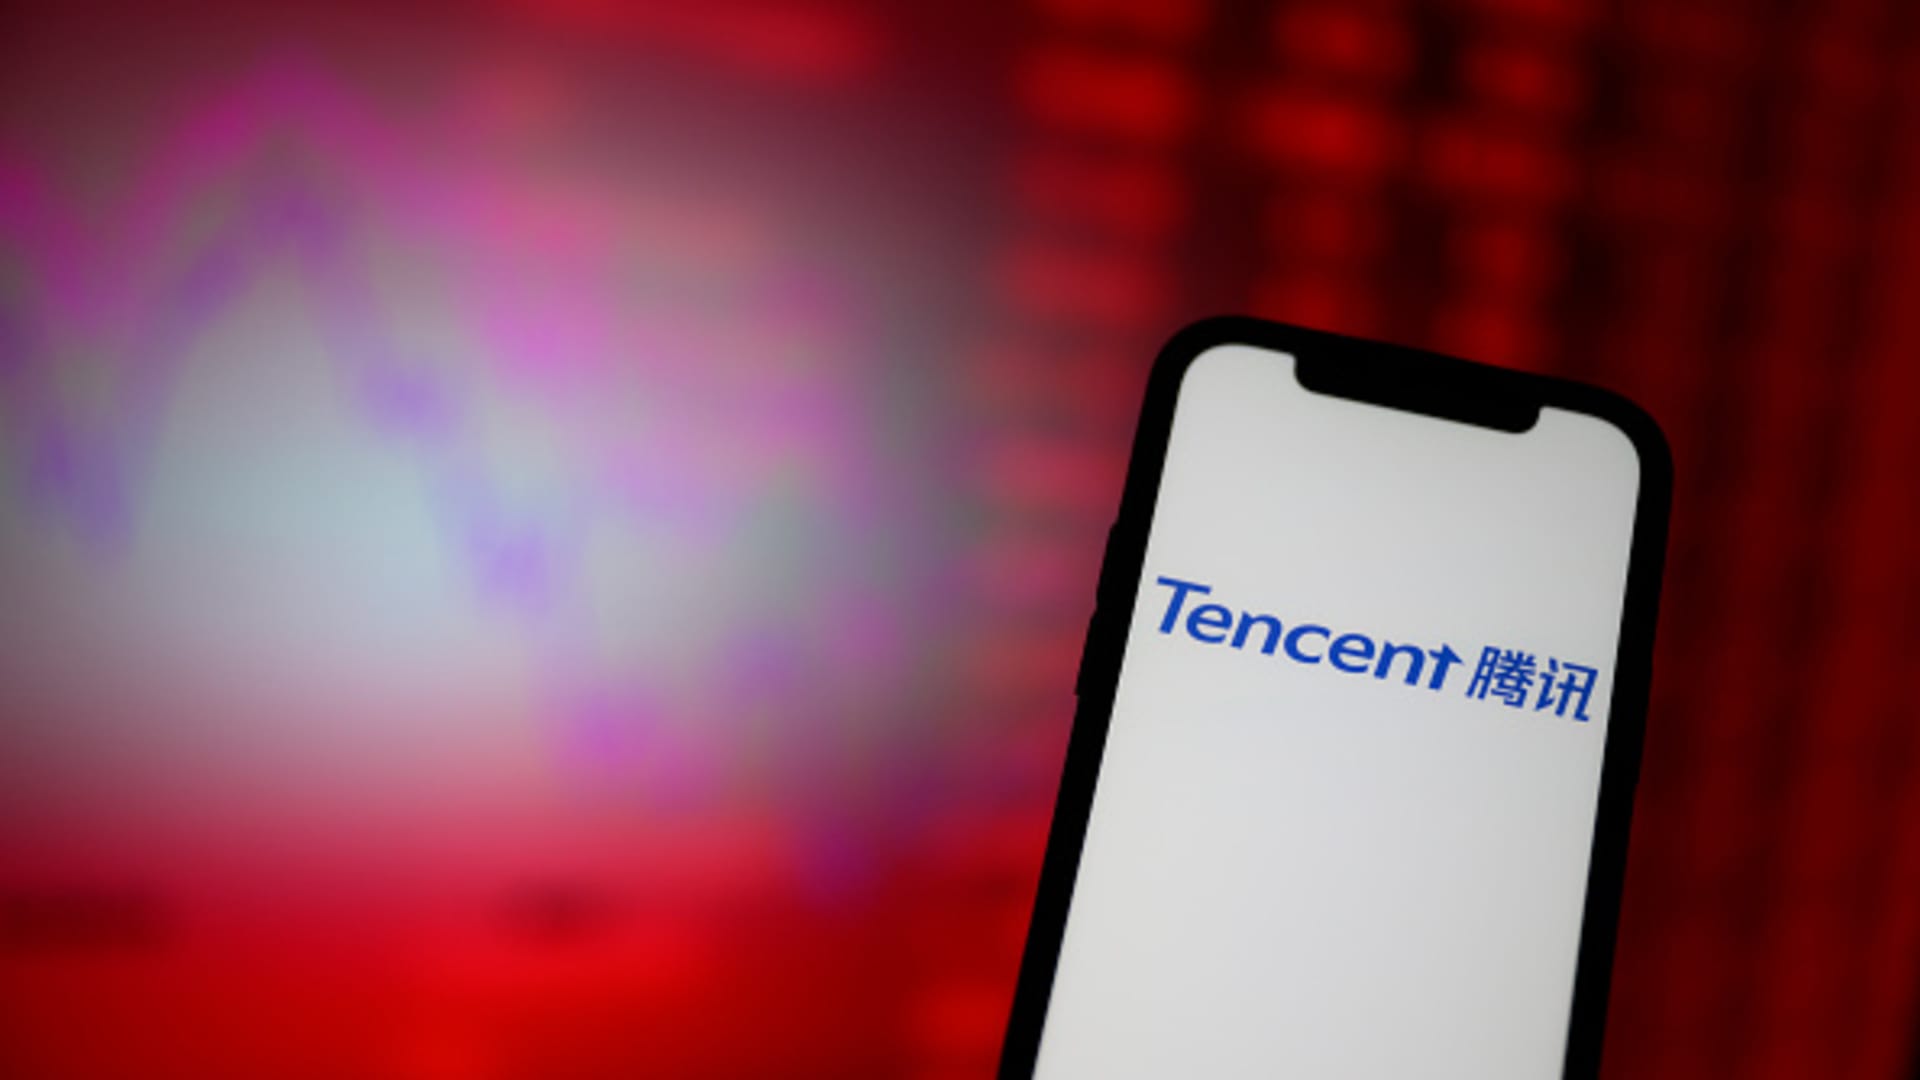 Tencent, Alibaba and more: These firms are primed for buybacks and present opportunities, says Jefferies